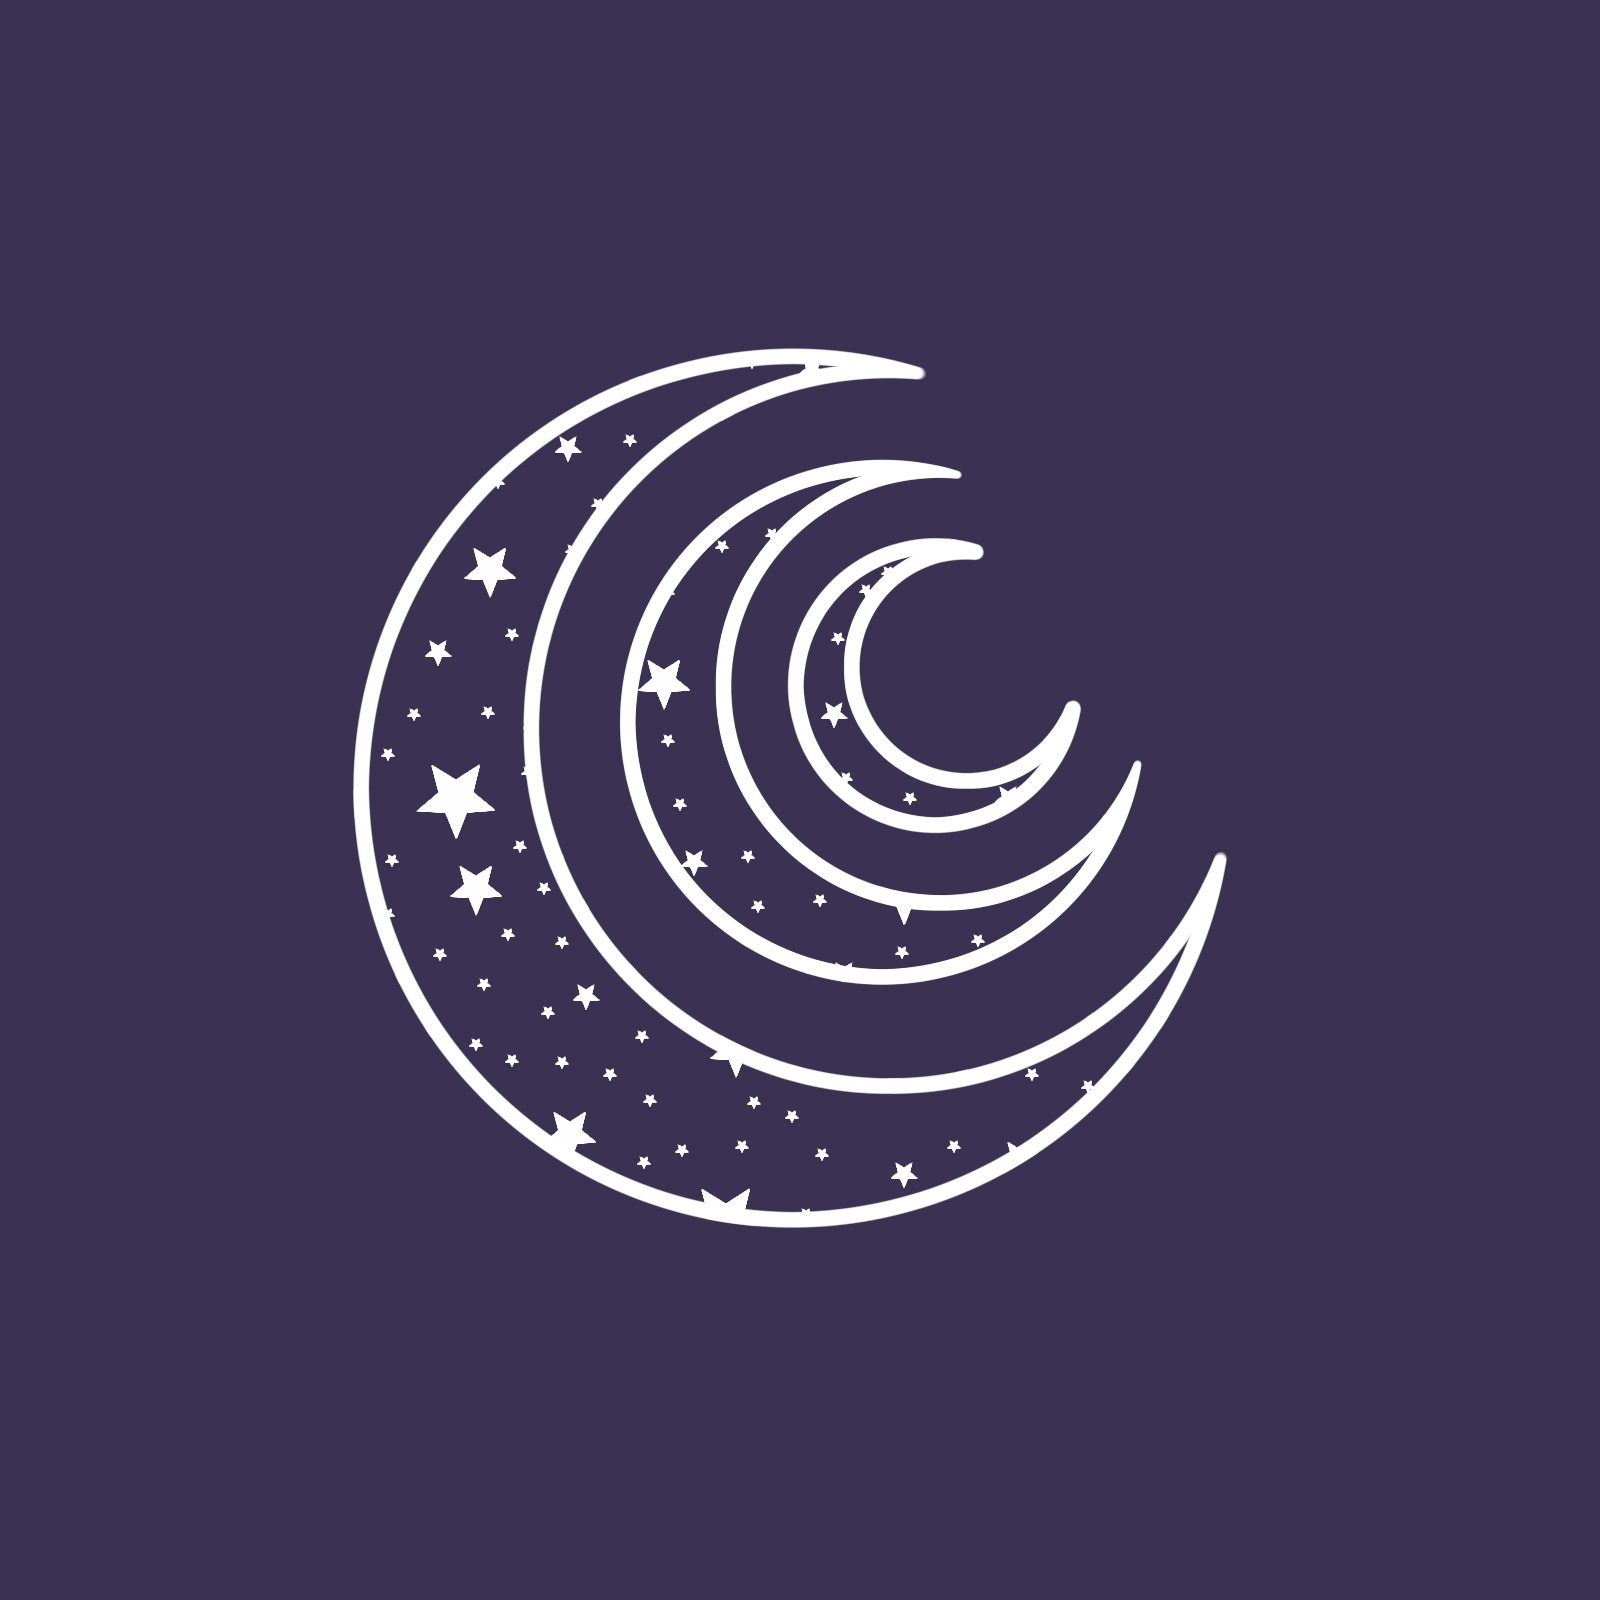 White Star-Filled UCCCLE Logo with Stars on Purple Background